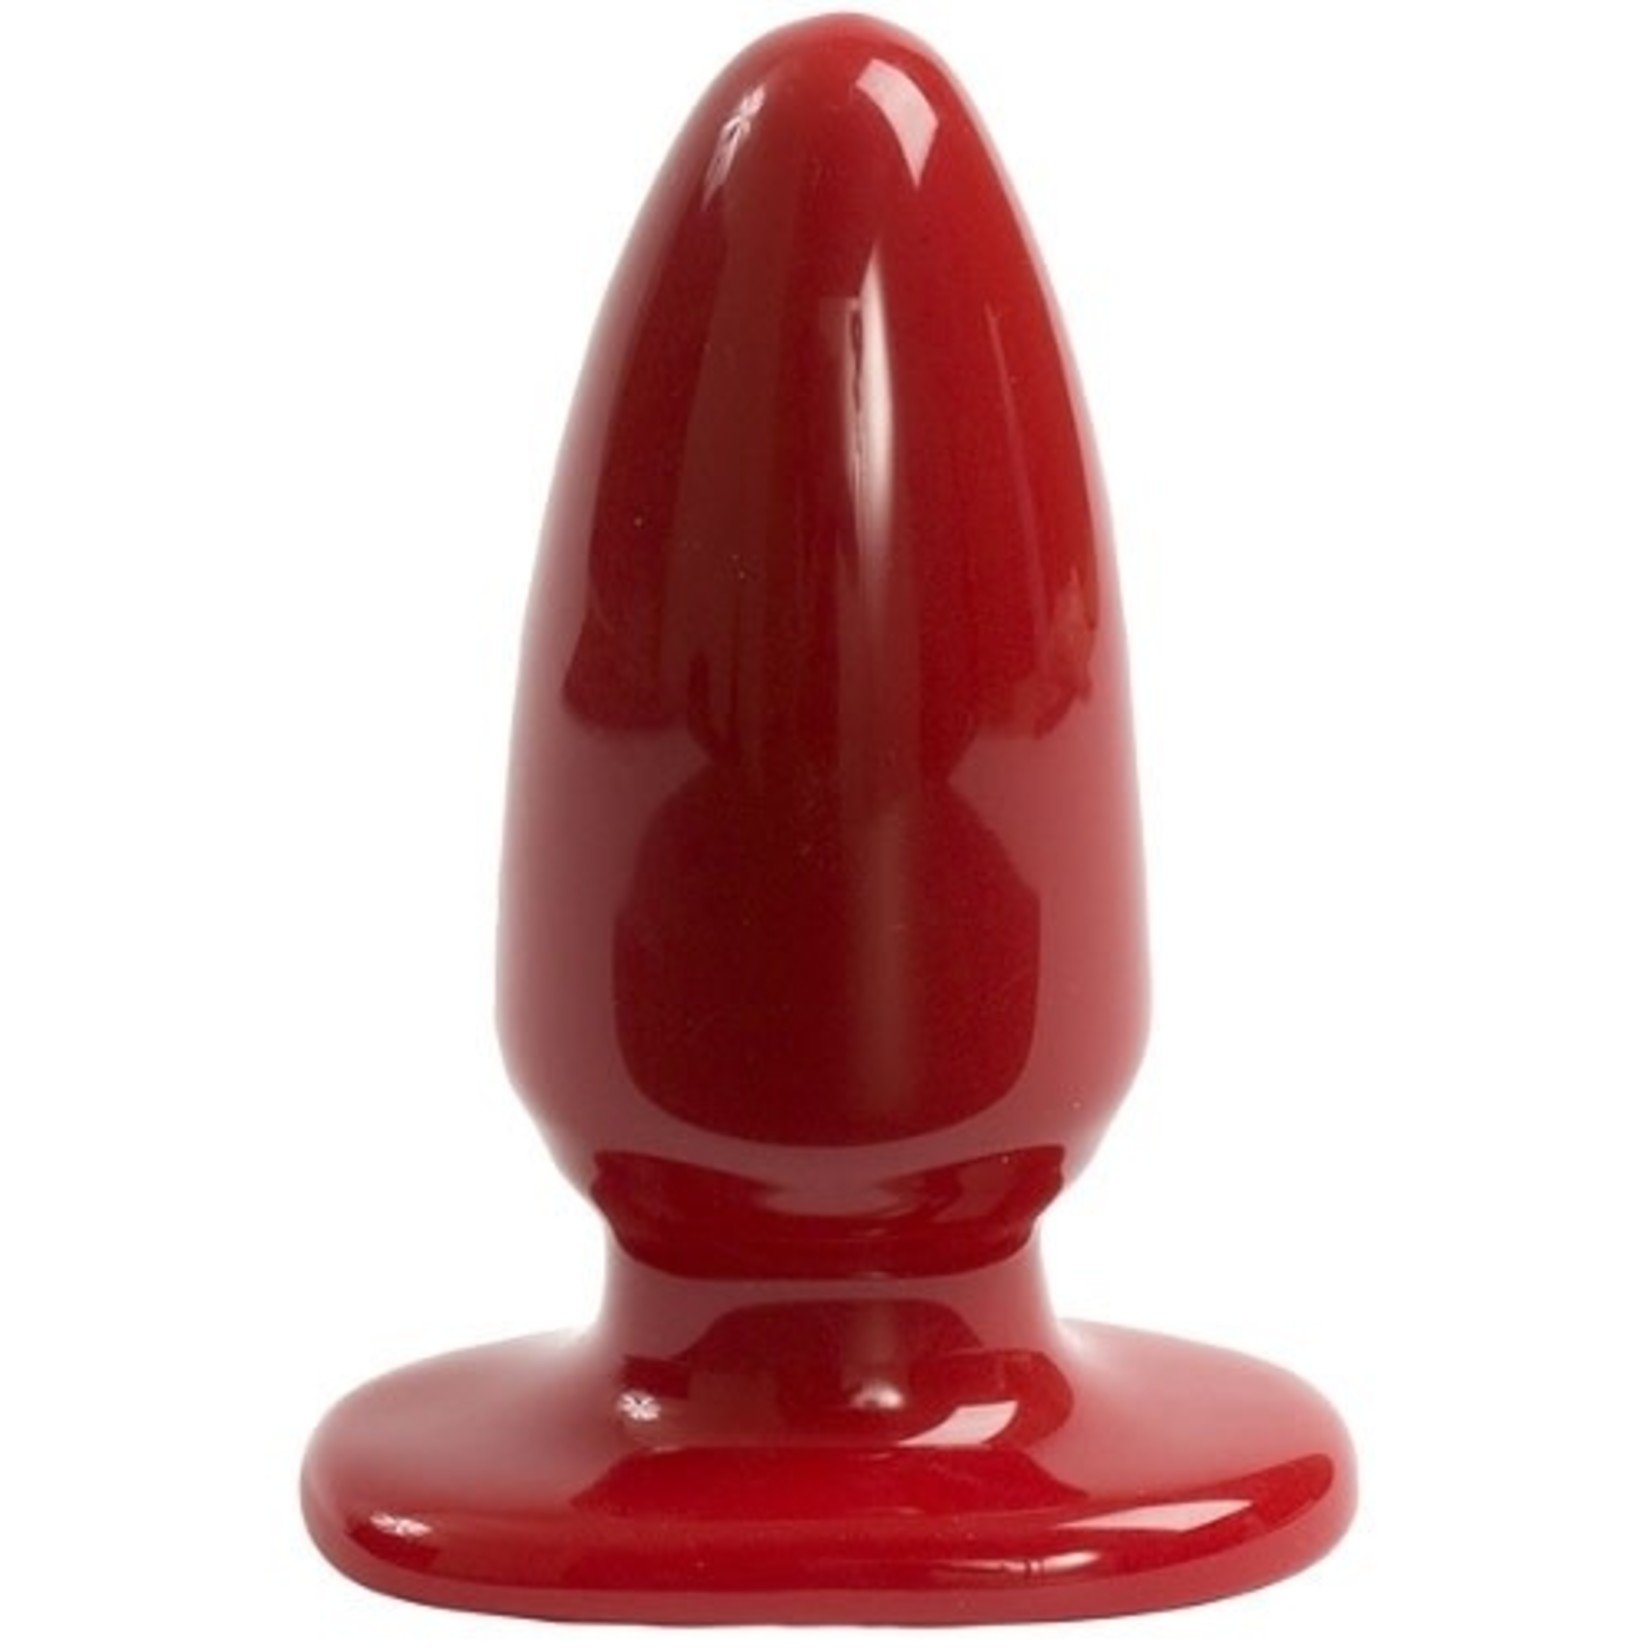 DOC JOHNSON RED BOY - BUTT PLUG - LARGE RED